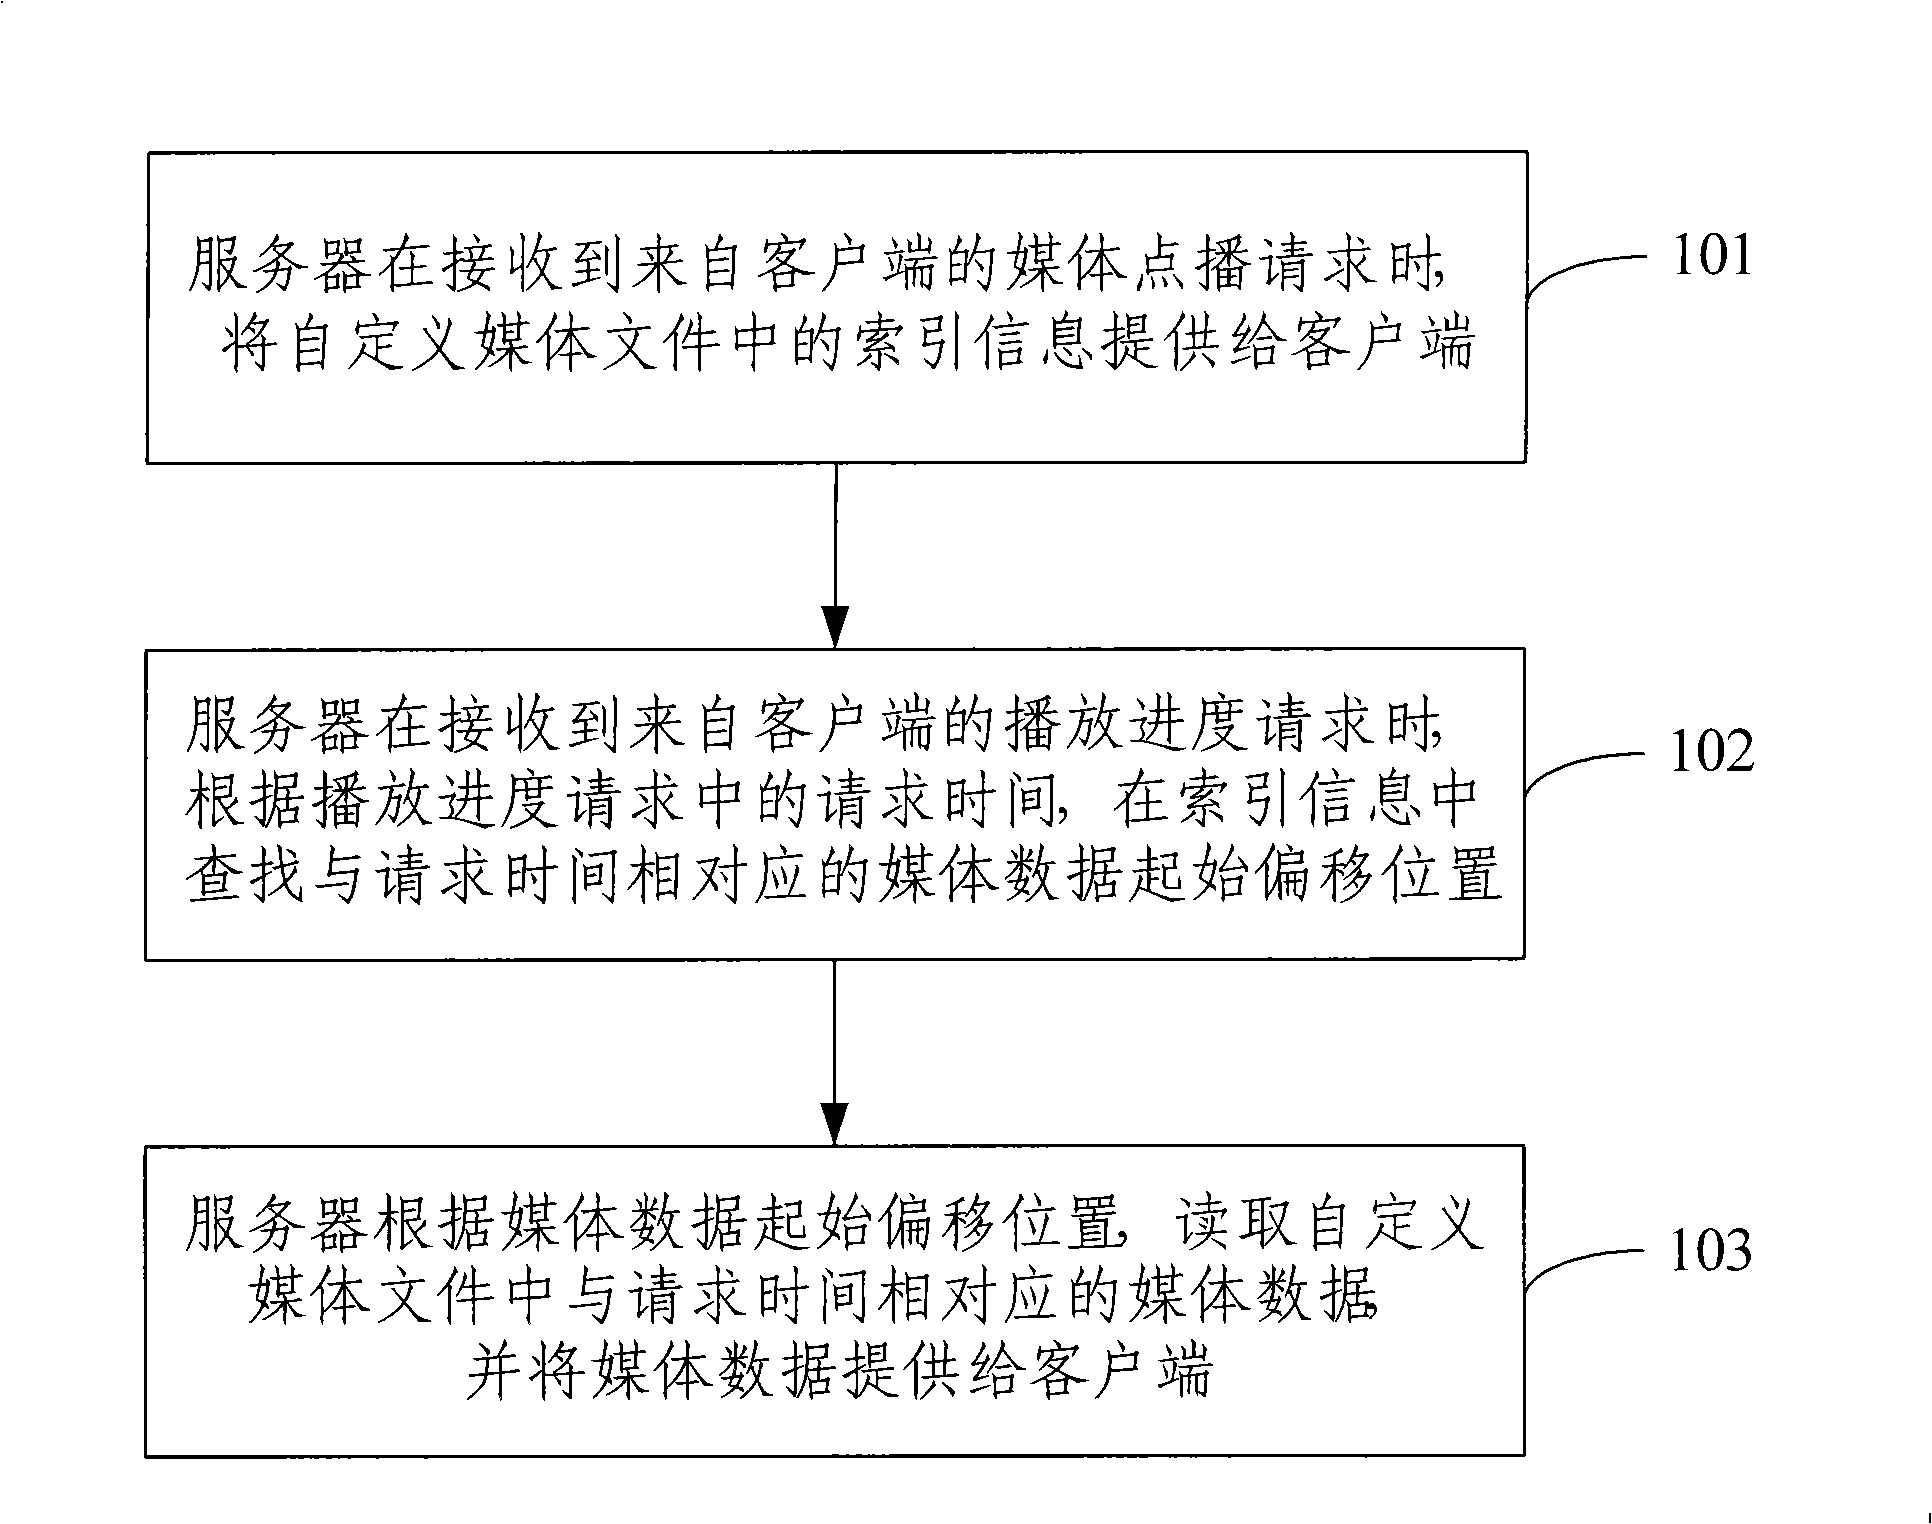 Demand method, system and device of media file